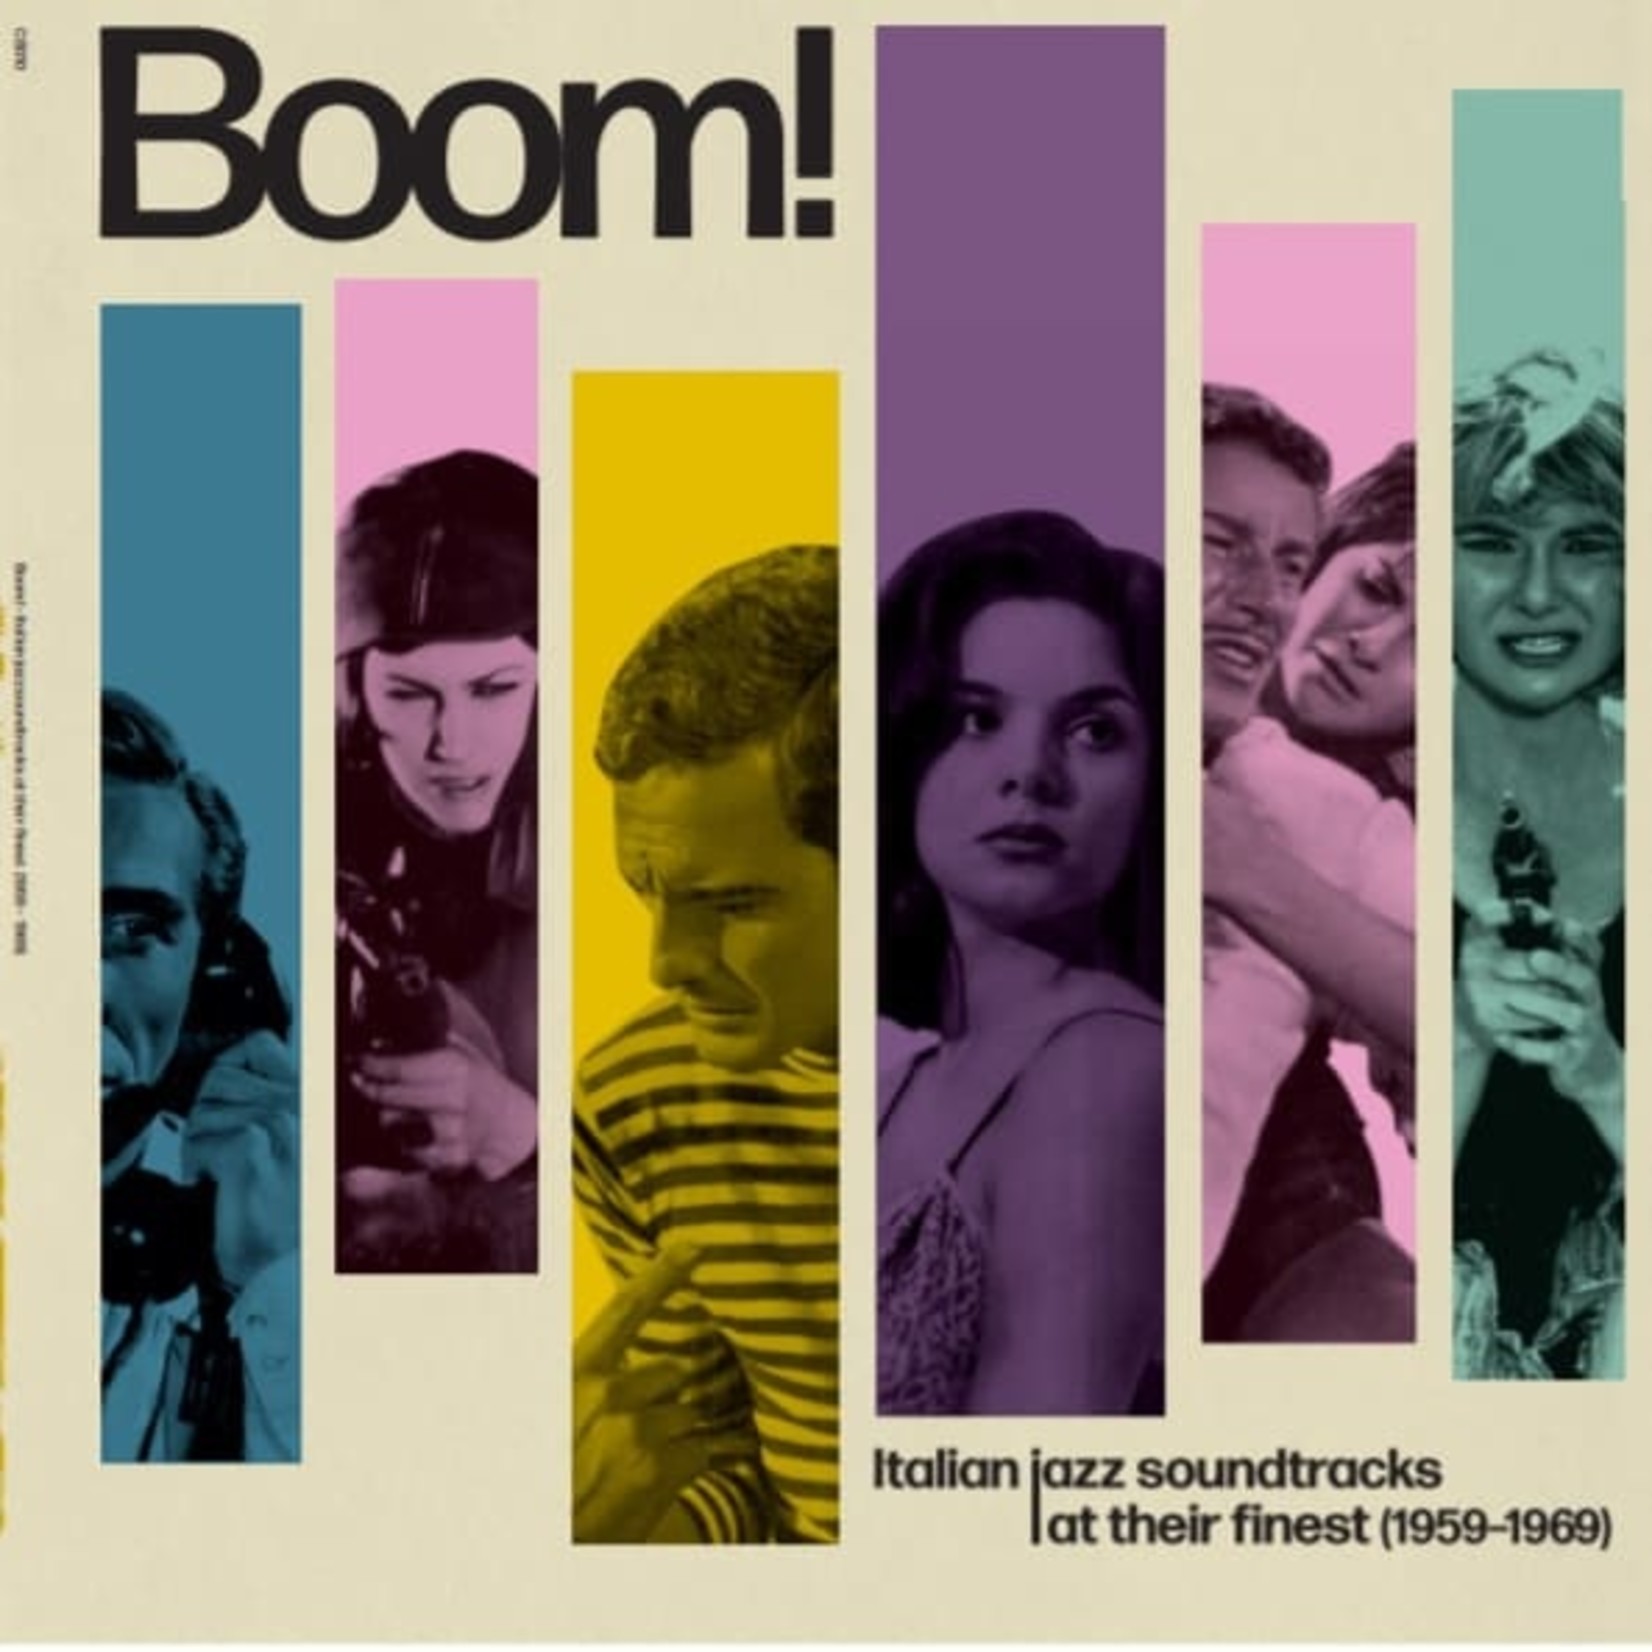 [New] Various Artists - Boom! Italian Jazz Soundtracks At Their Finest 1959-1969 (2LP)